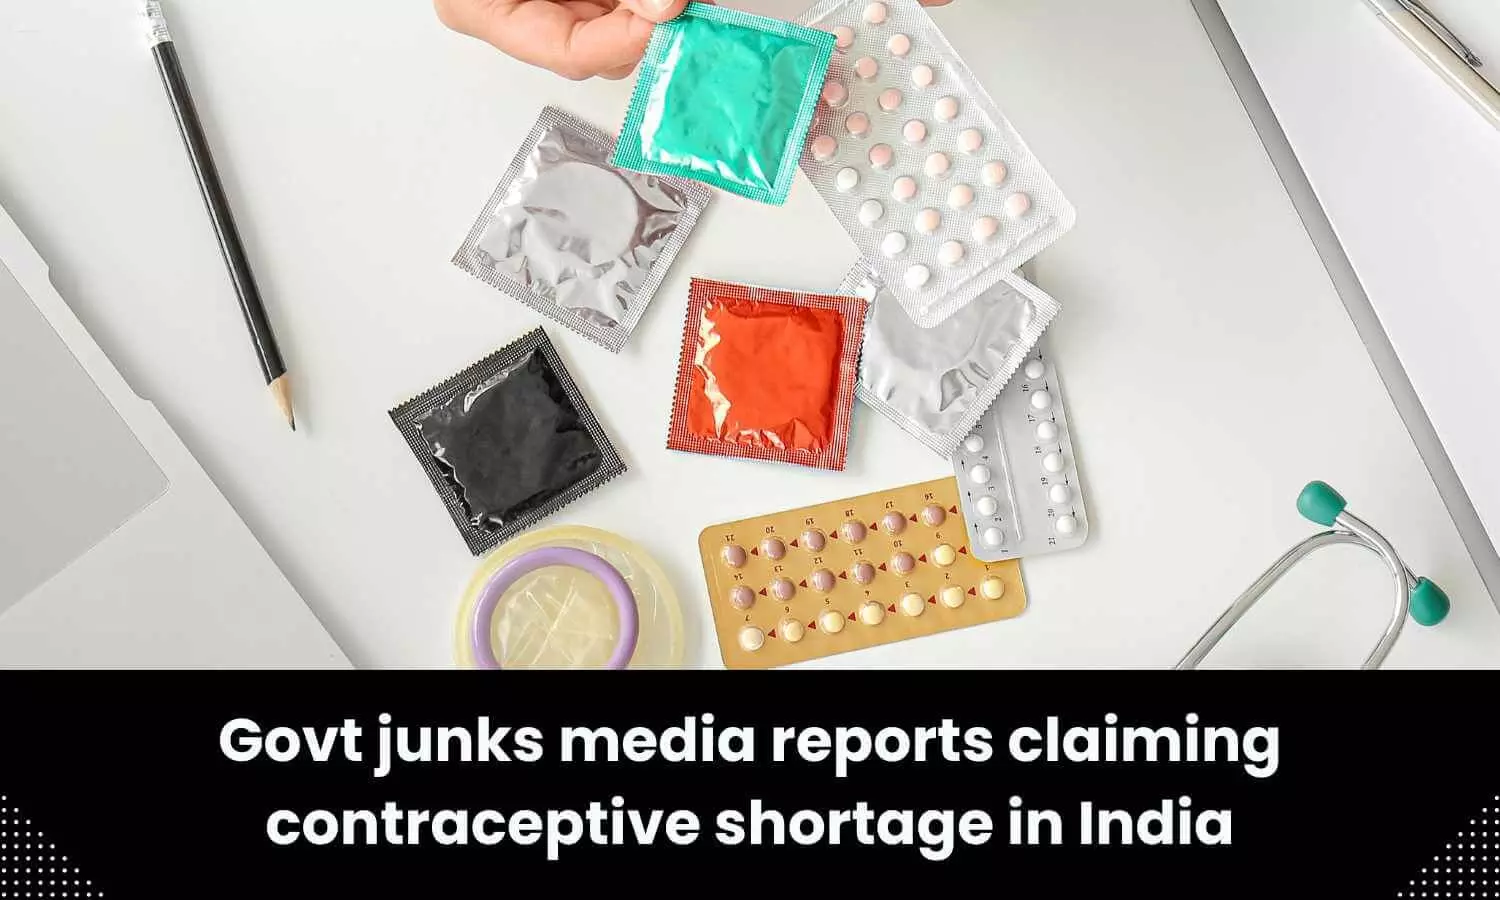 Media reports claiming failure in procuring contraceptives are Ill-informed, misleading